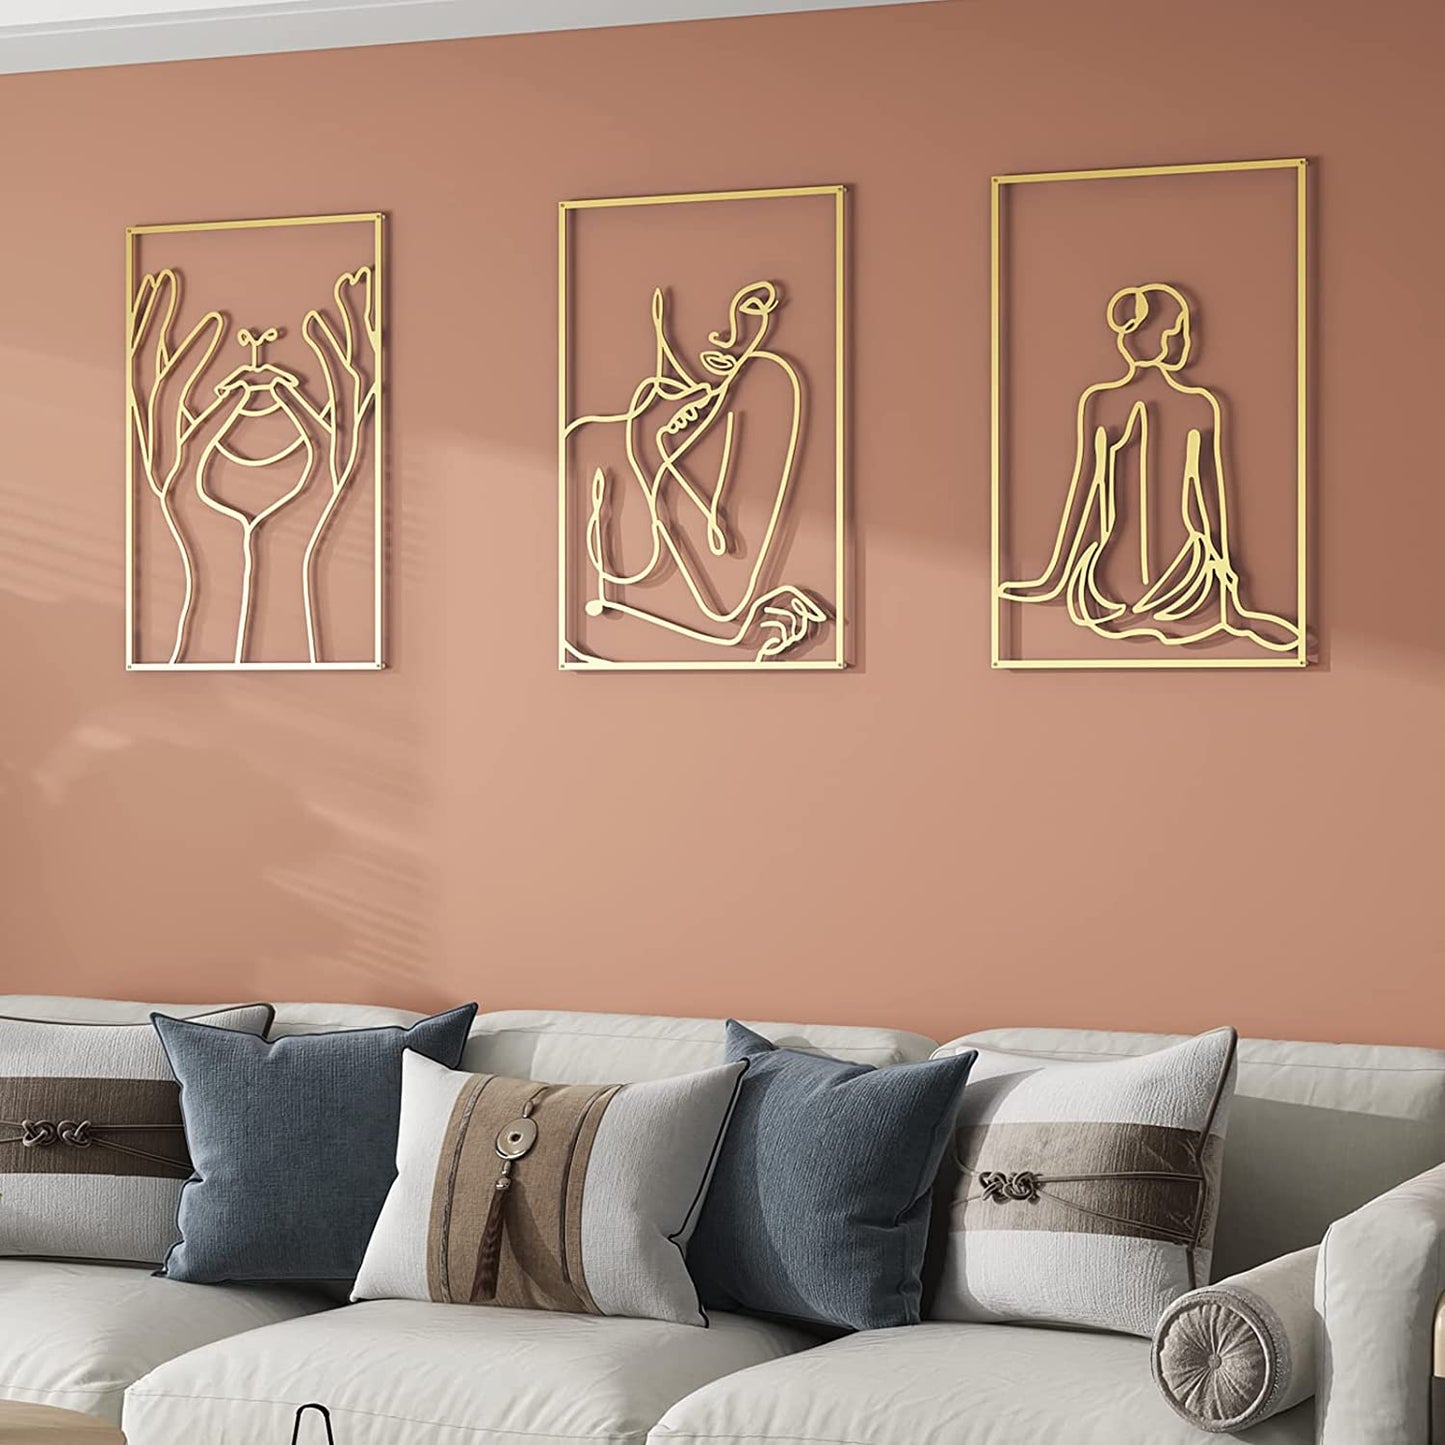 Modern Abstract Female Gold Line Silhouette Metal Art │ Nordic Woman Iron Wall Hanging Decor Ornament Besontique Home Decor Interior